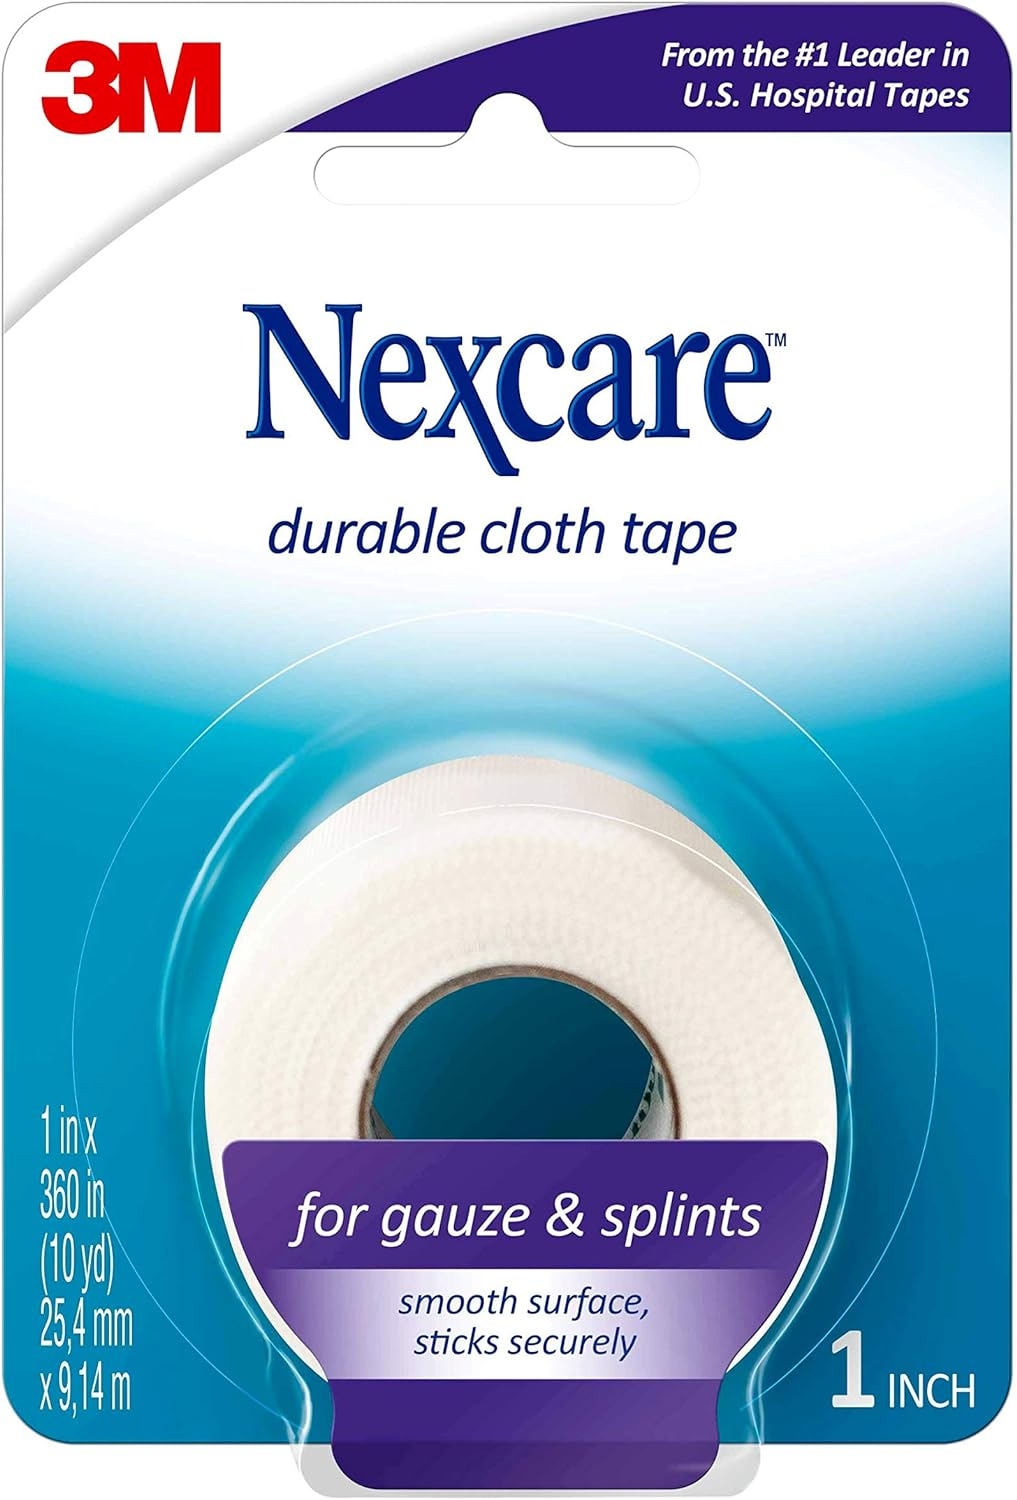 Nexcare Durable Cloth First Aid Tape, Tears Easily, 1 Roll